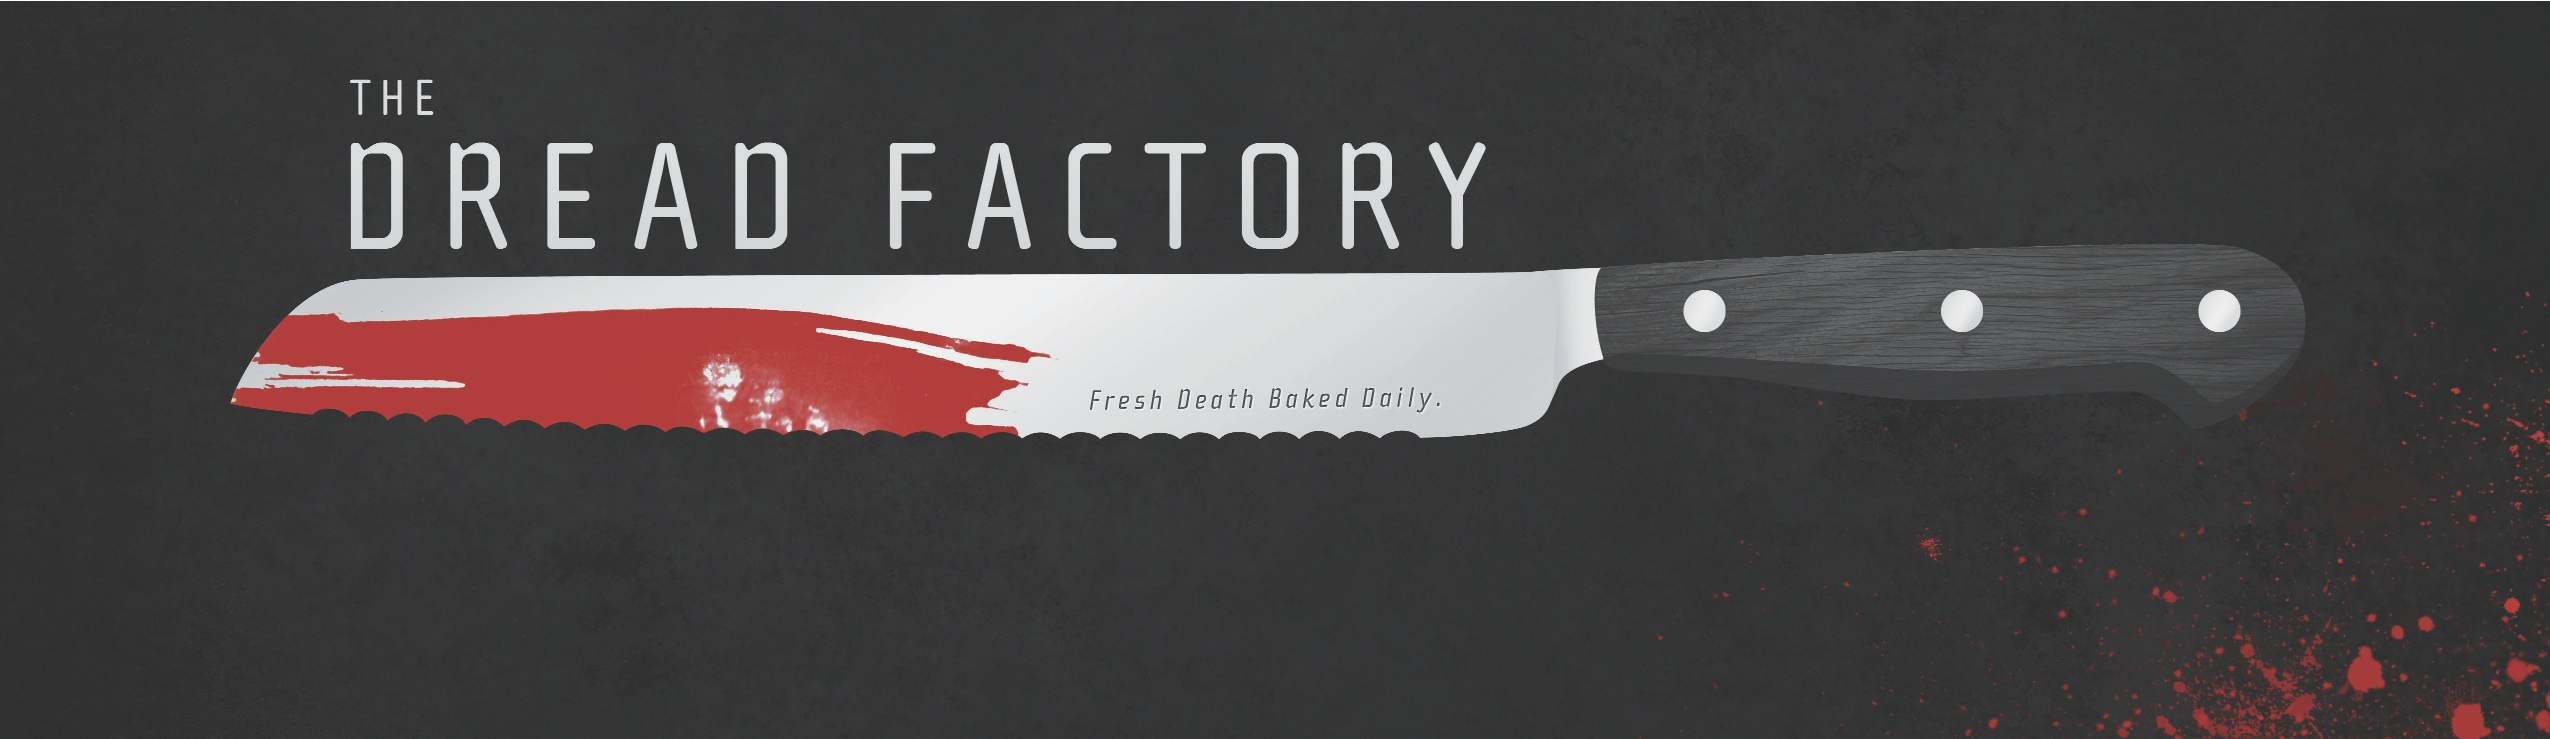 The Dread Factory